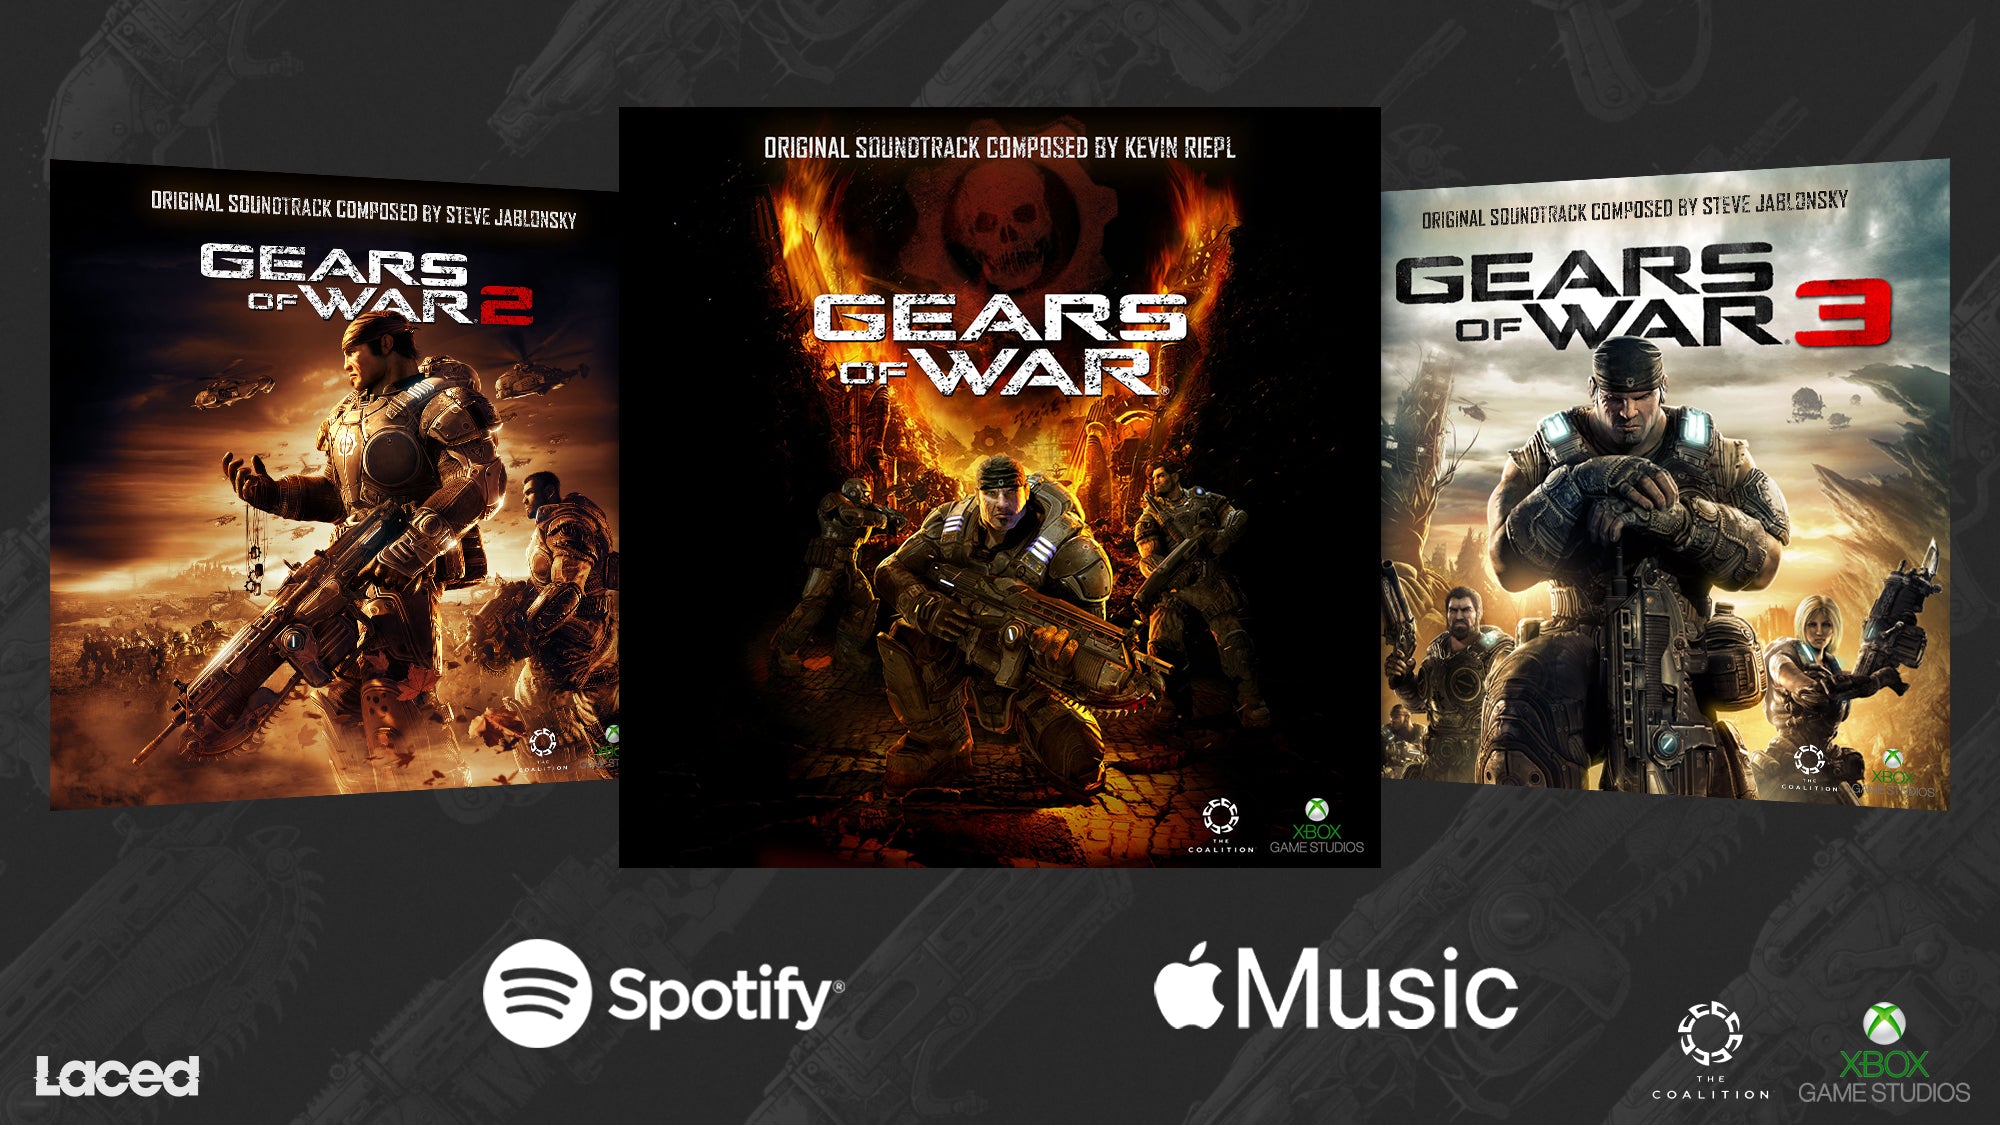 Gears of War 1-3 remastered soundtracks now streaming